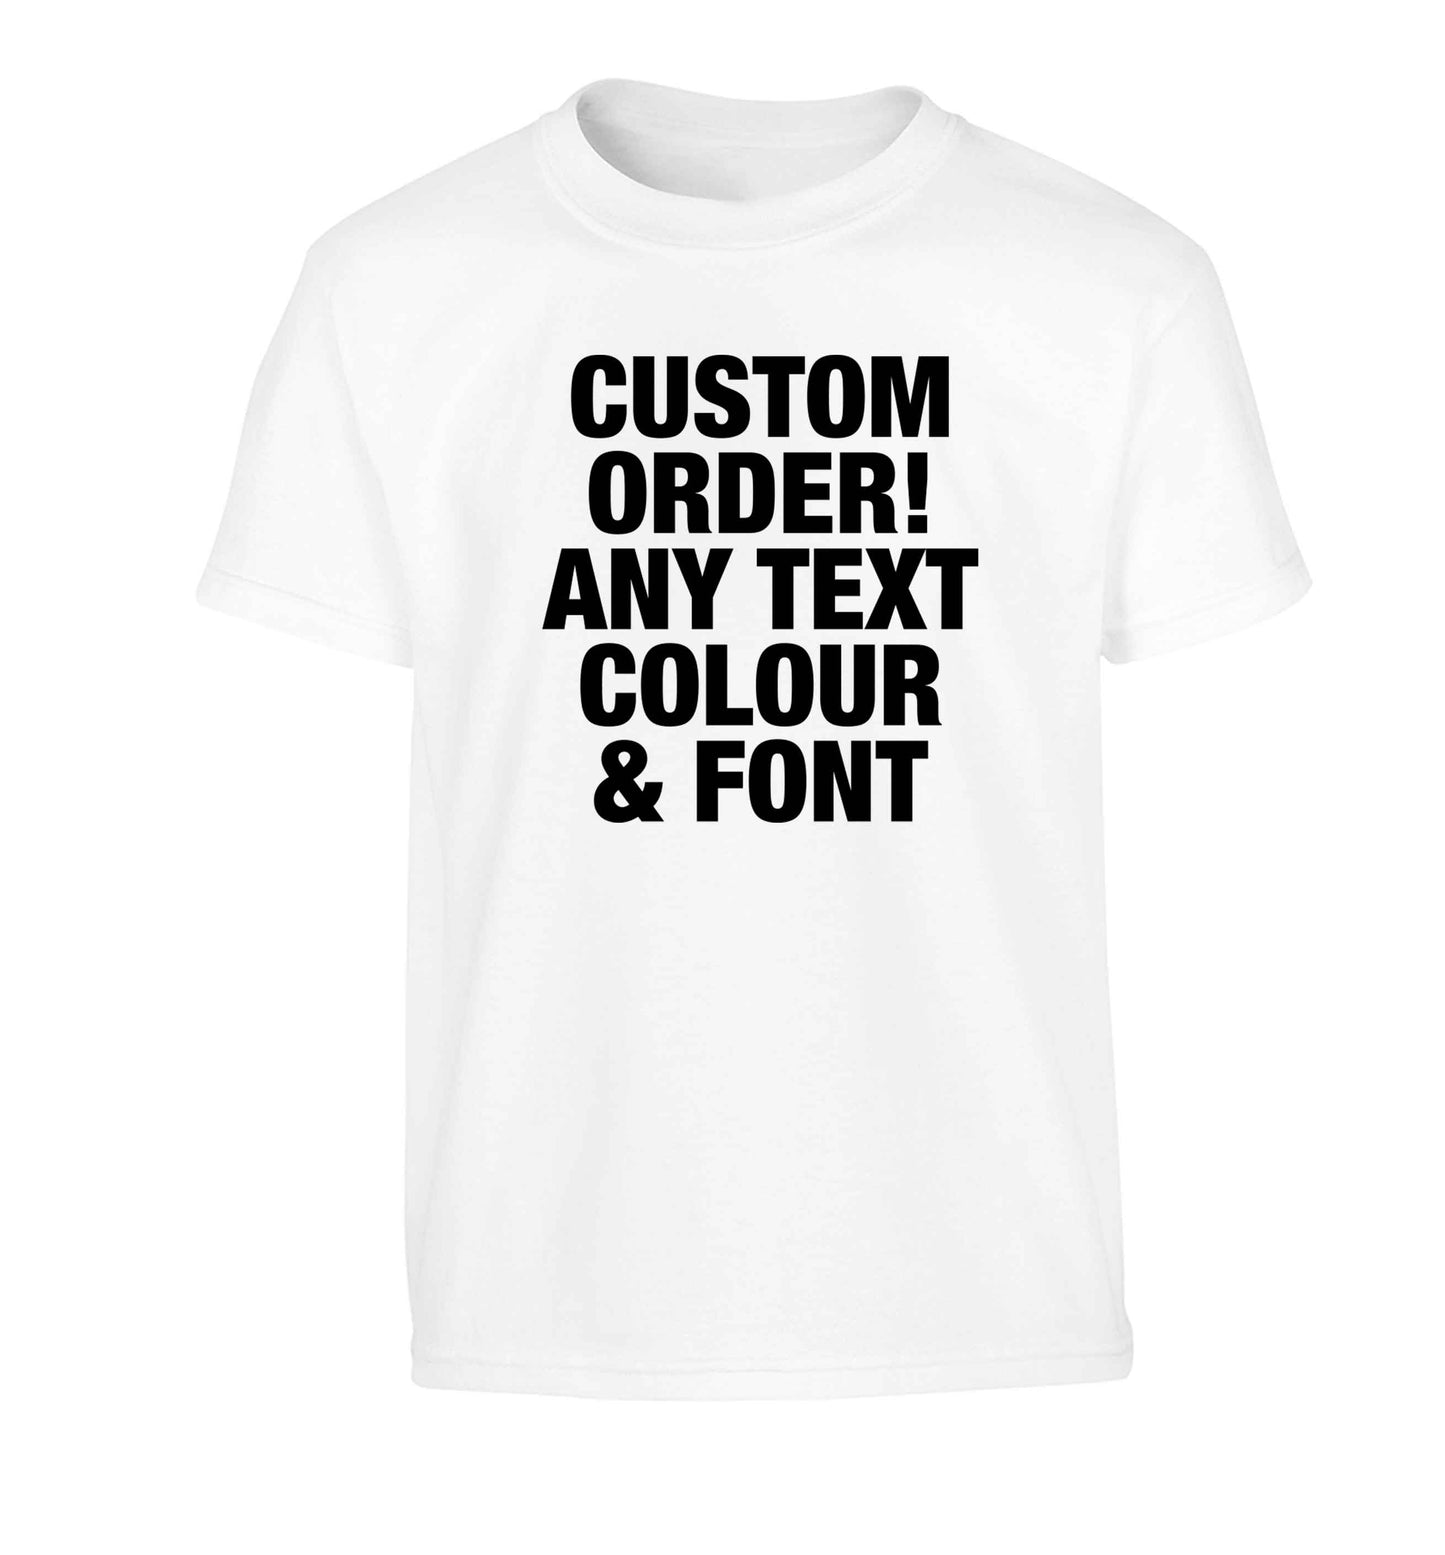 Custom order any text colour and font Children's white Tshirt 12-13 Years